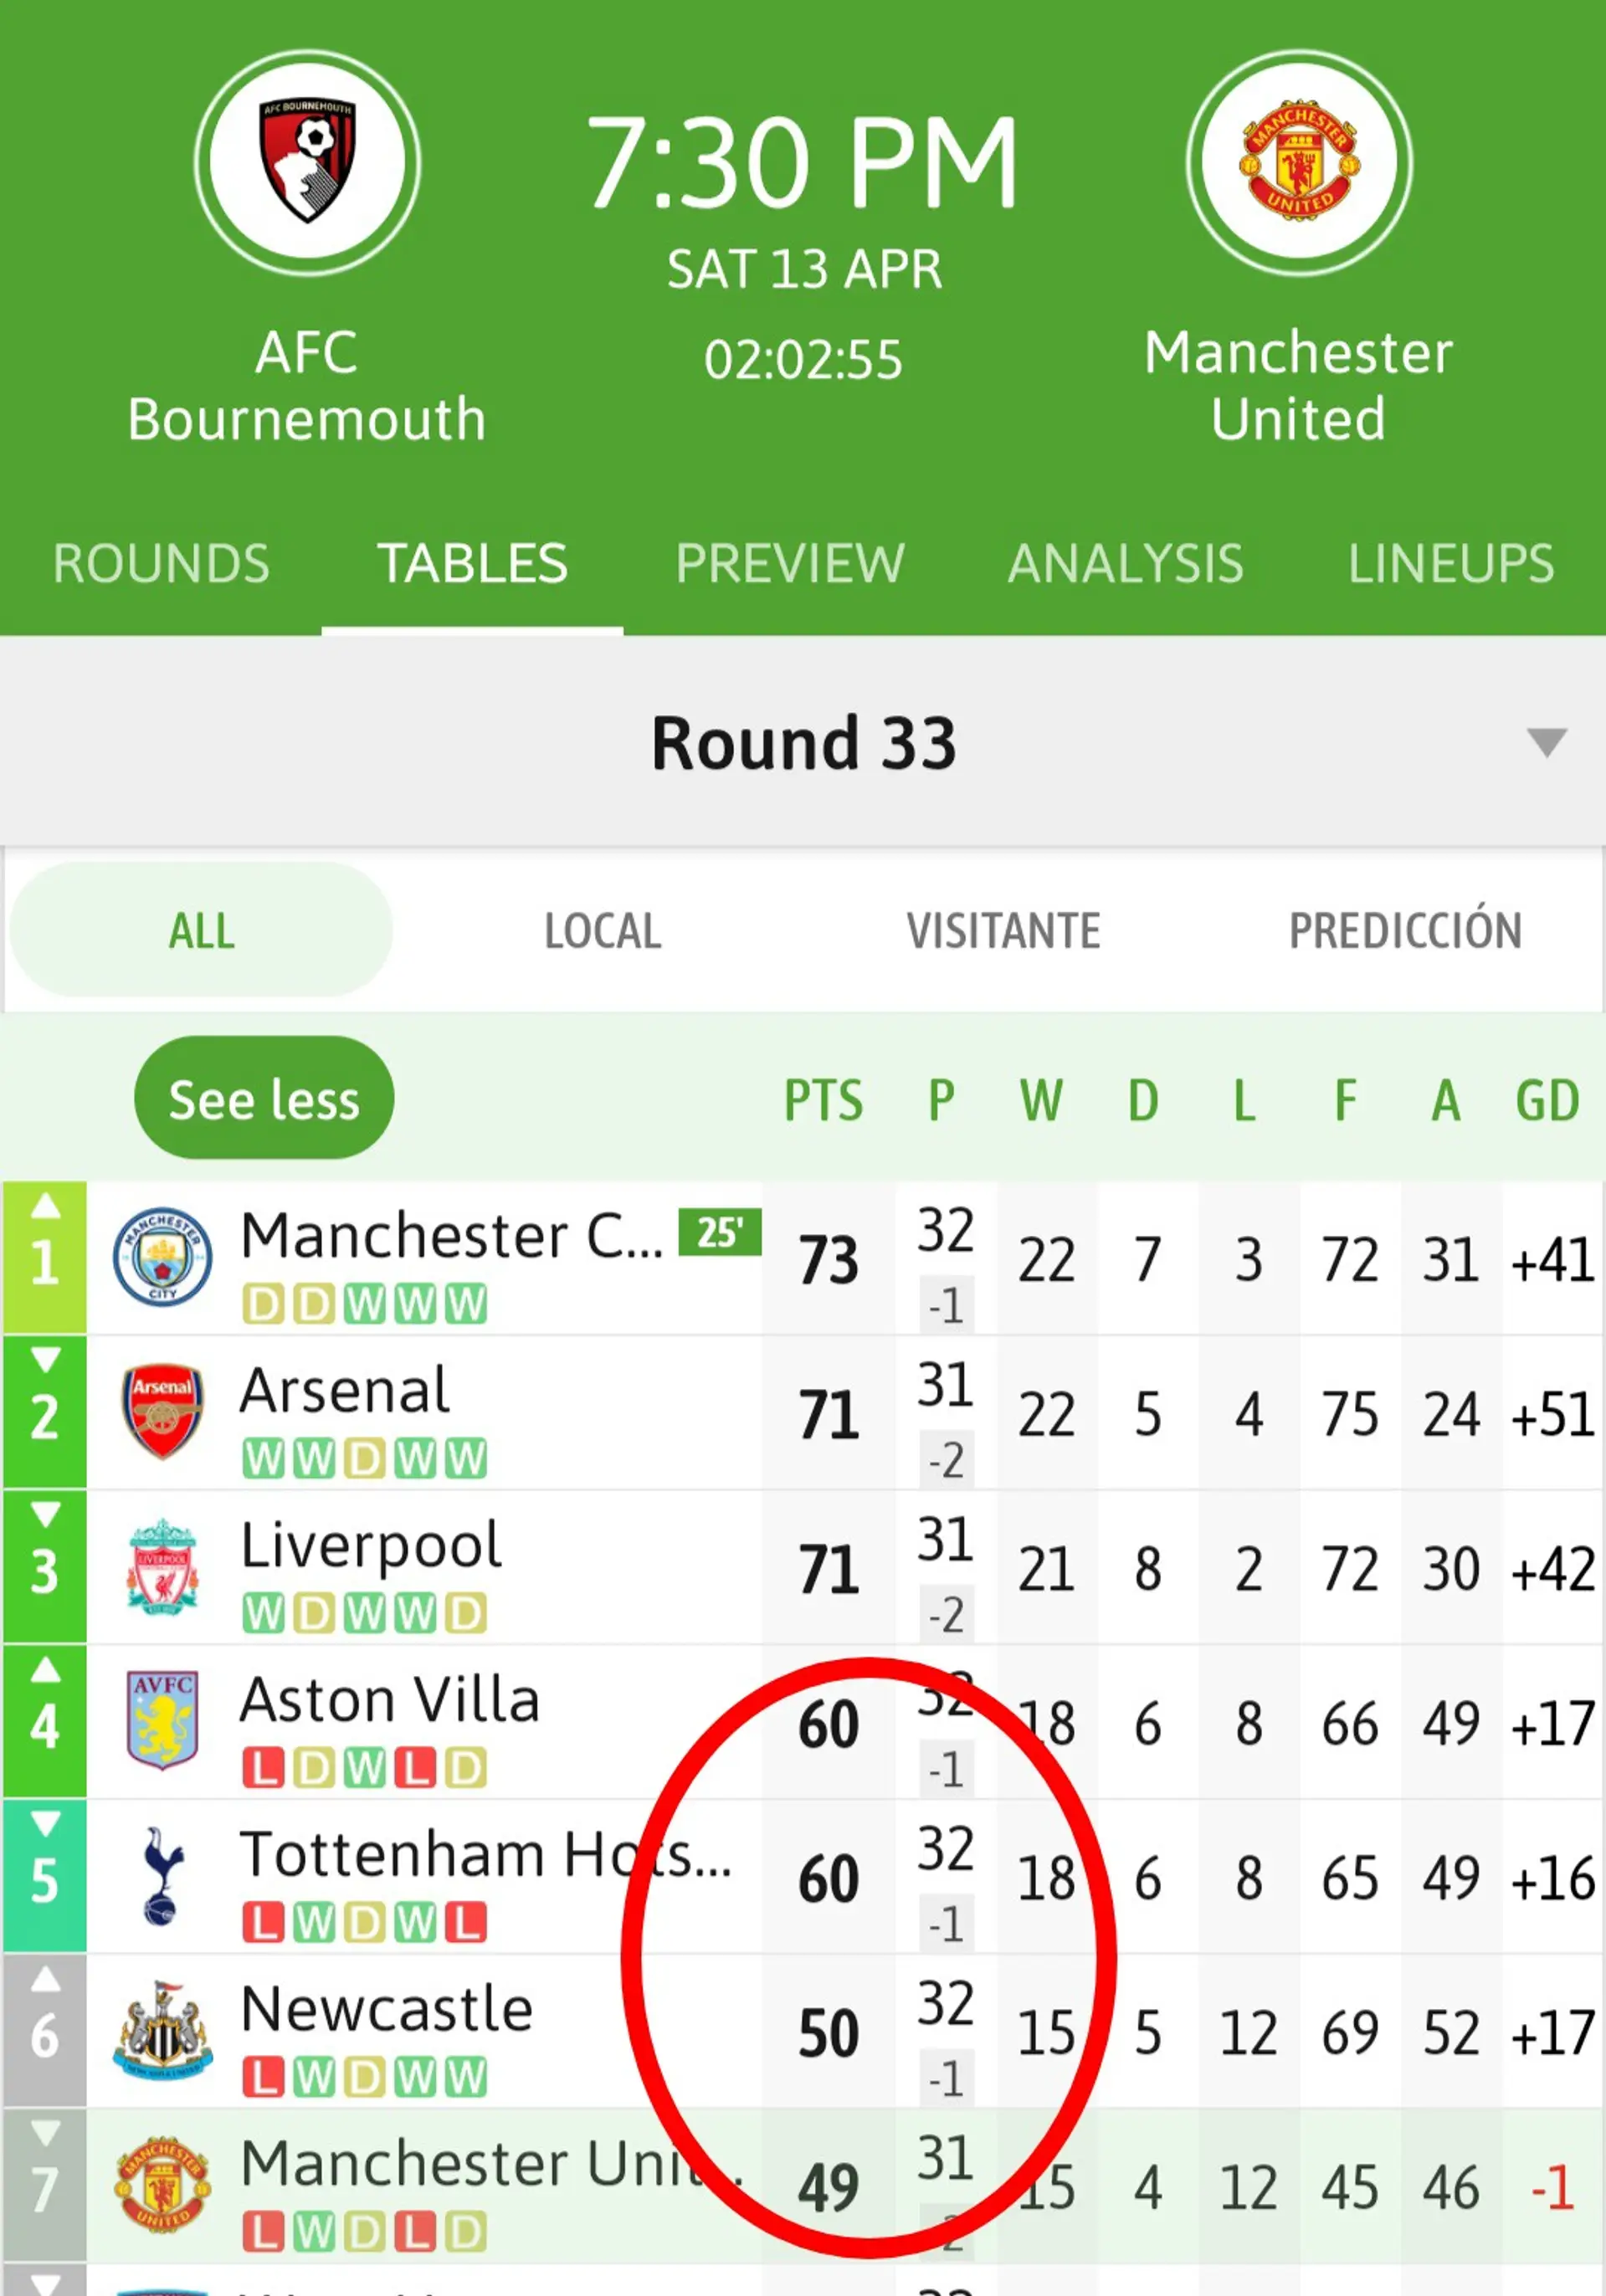 Man United win todays game against Bournemouth is not 3 point, it is 6 point.